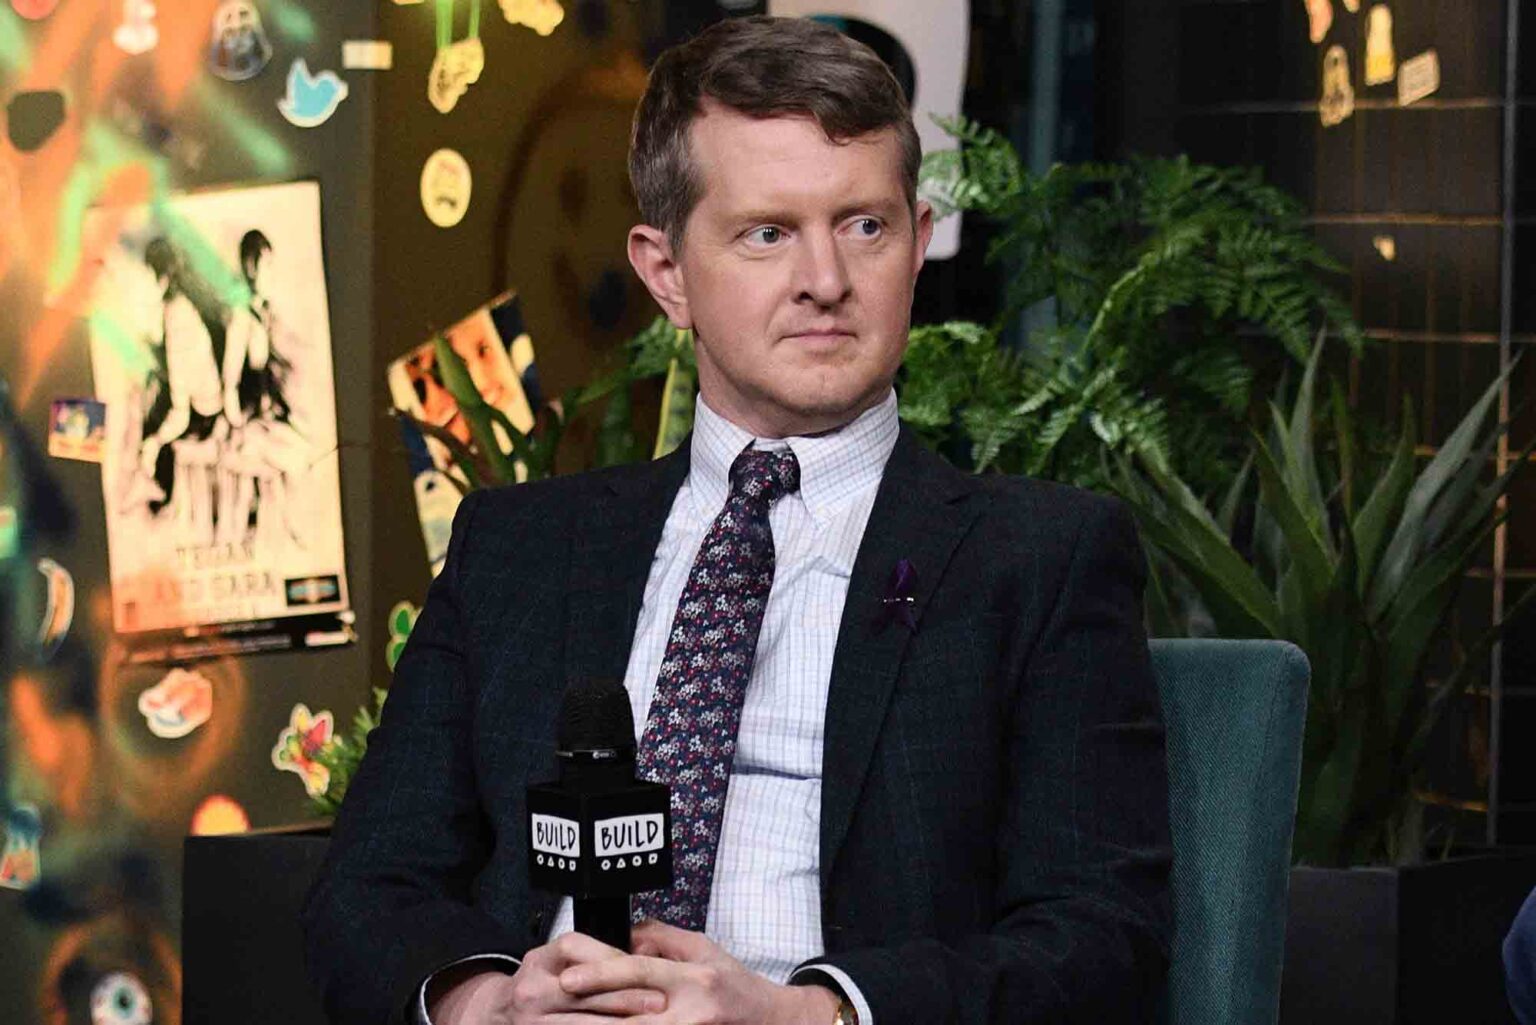 Ken Jennings is coming under fire for . . . apologizing. Here's why Twitter is mad and doesn't want to see him host 'Jeopardy!'.